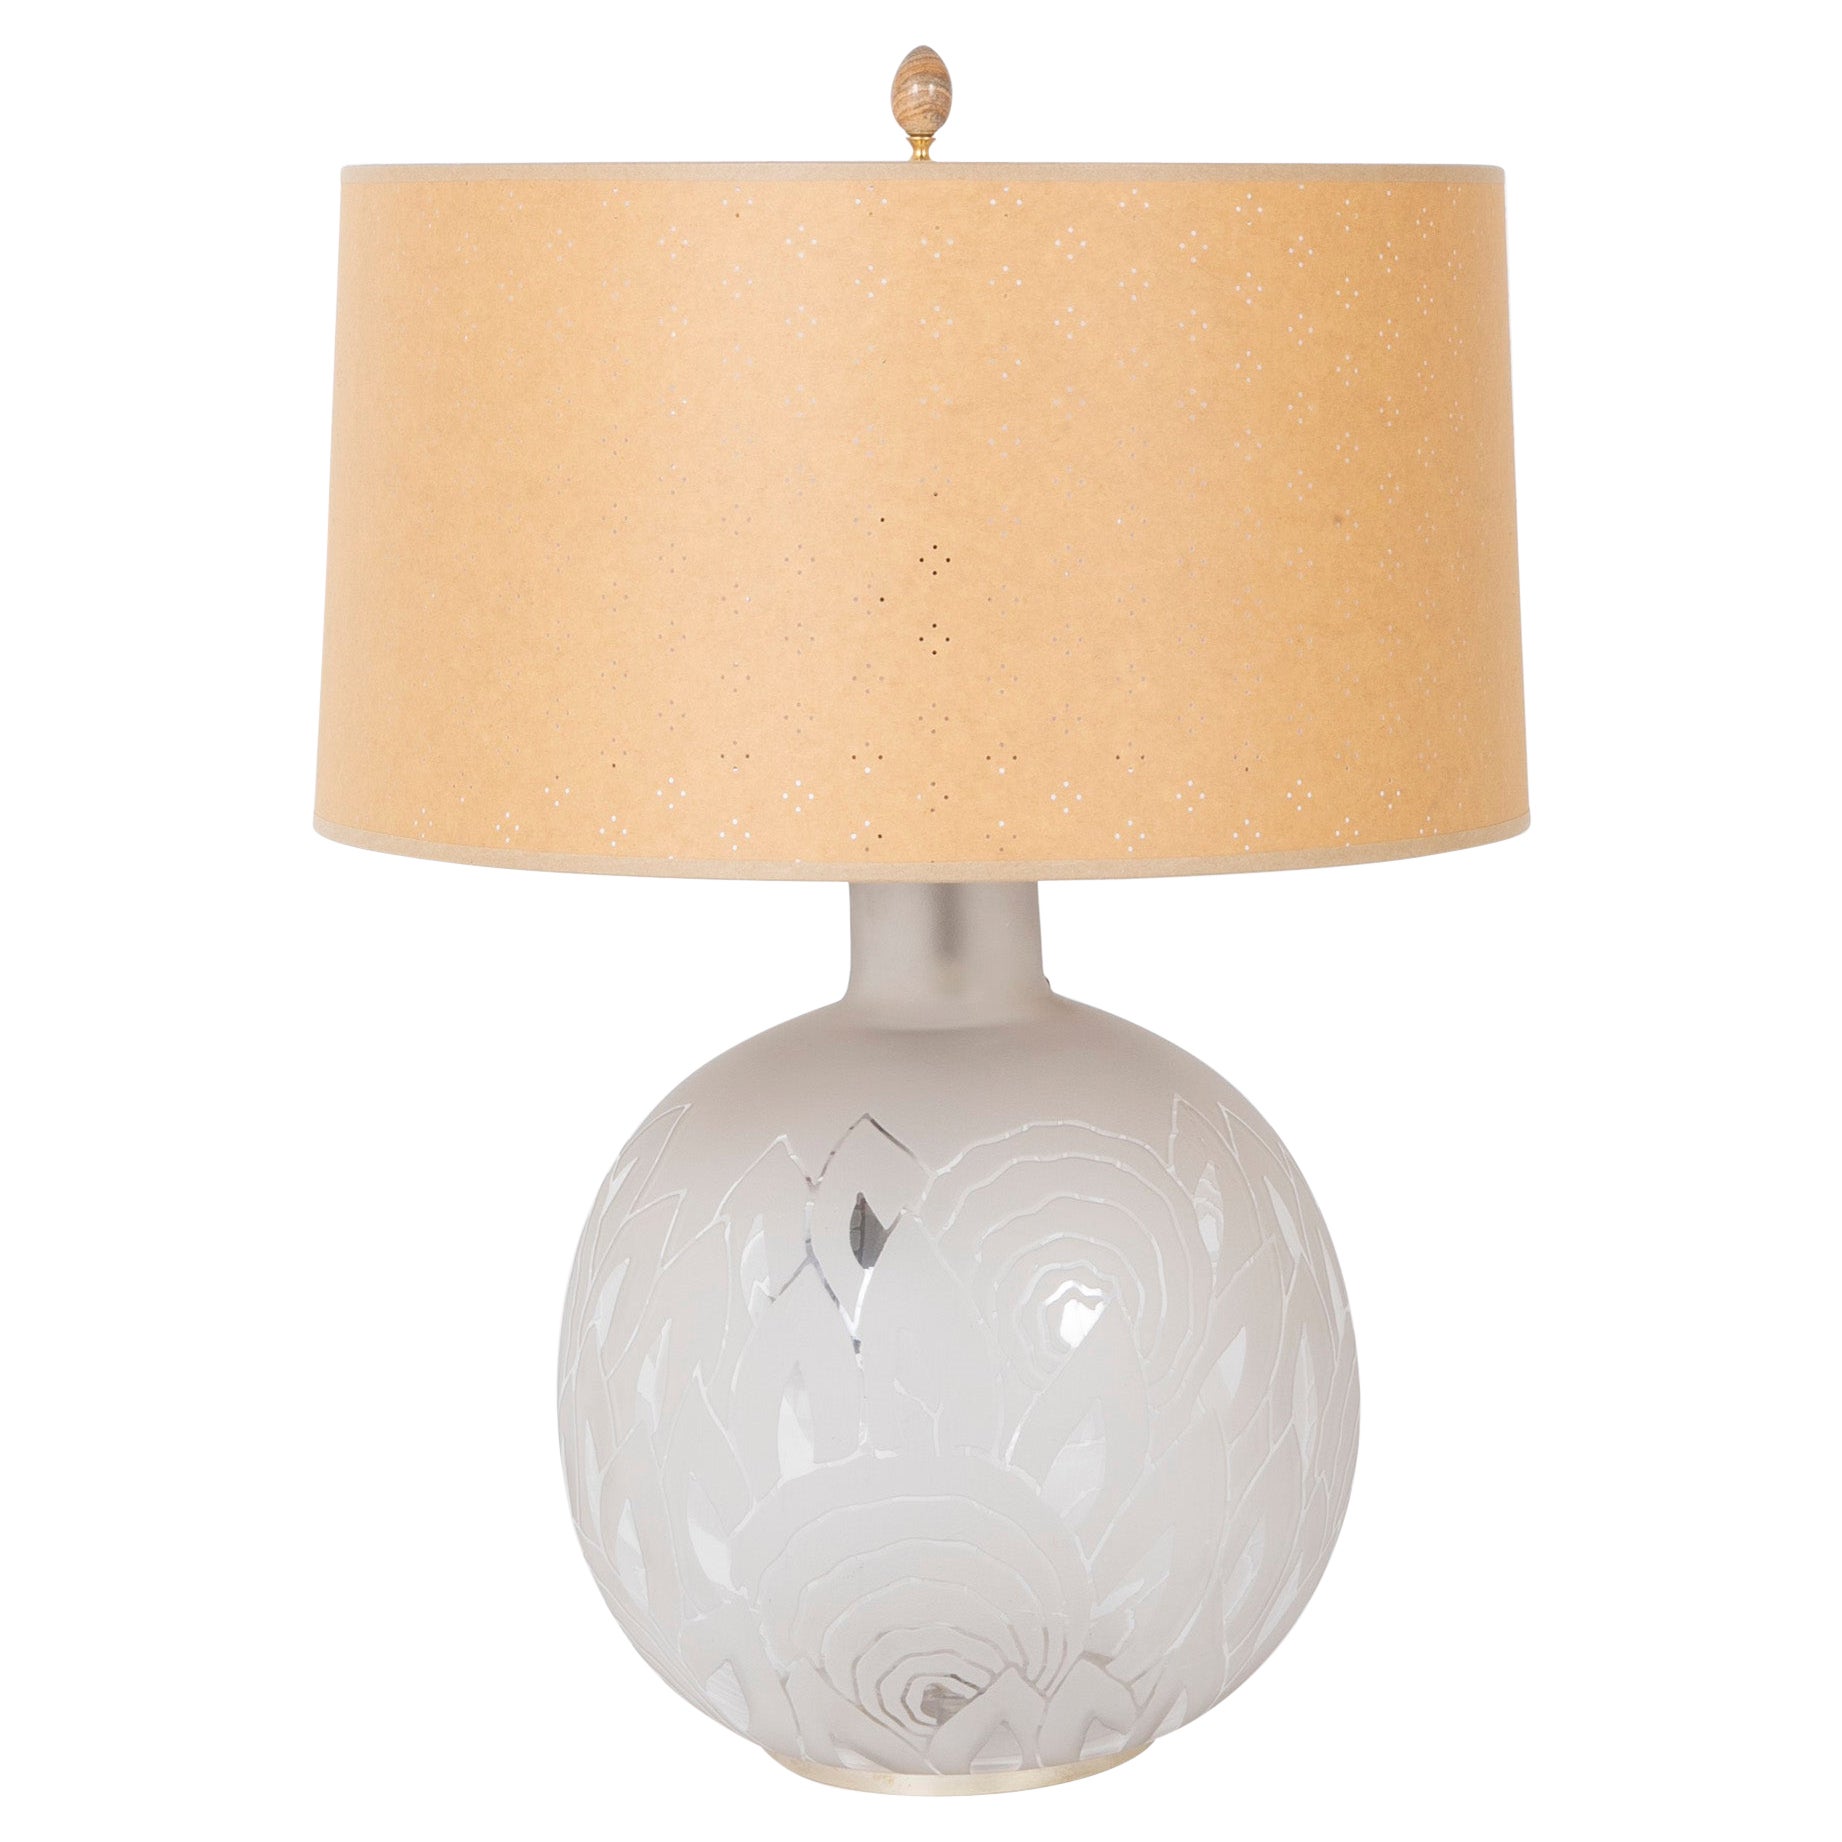 Jean Boris Lacroix Etched Glass Lamp in Rounded Form For Sale